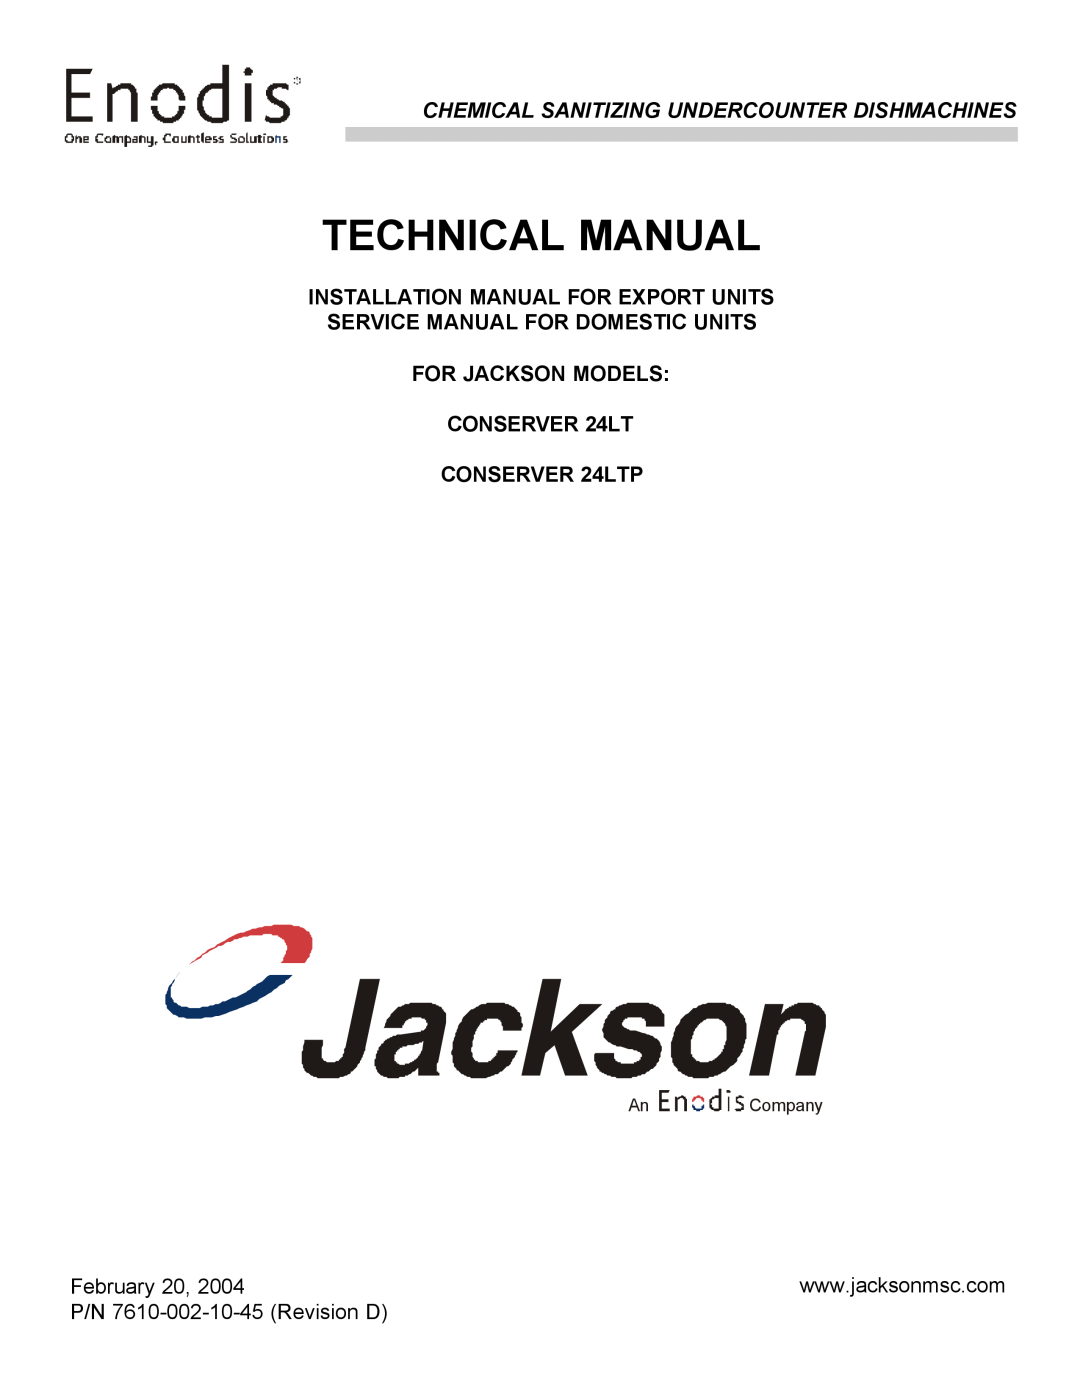 Jackson technical manual Technical Manual, Chemical Sanitizing Undercounter Dishmachines, CONSERVER 24LTP, February 